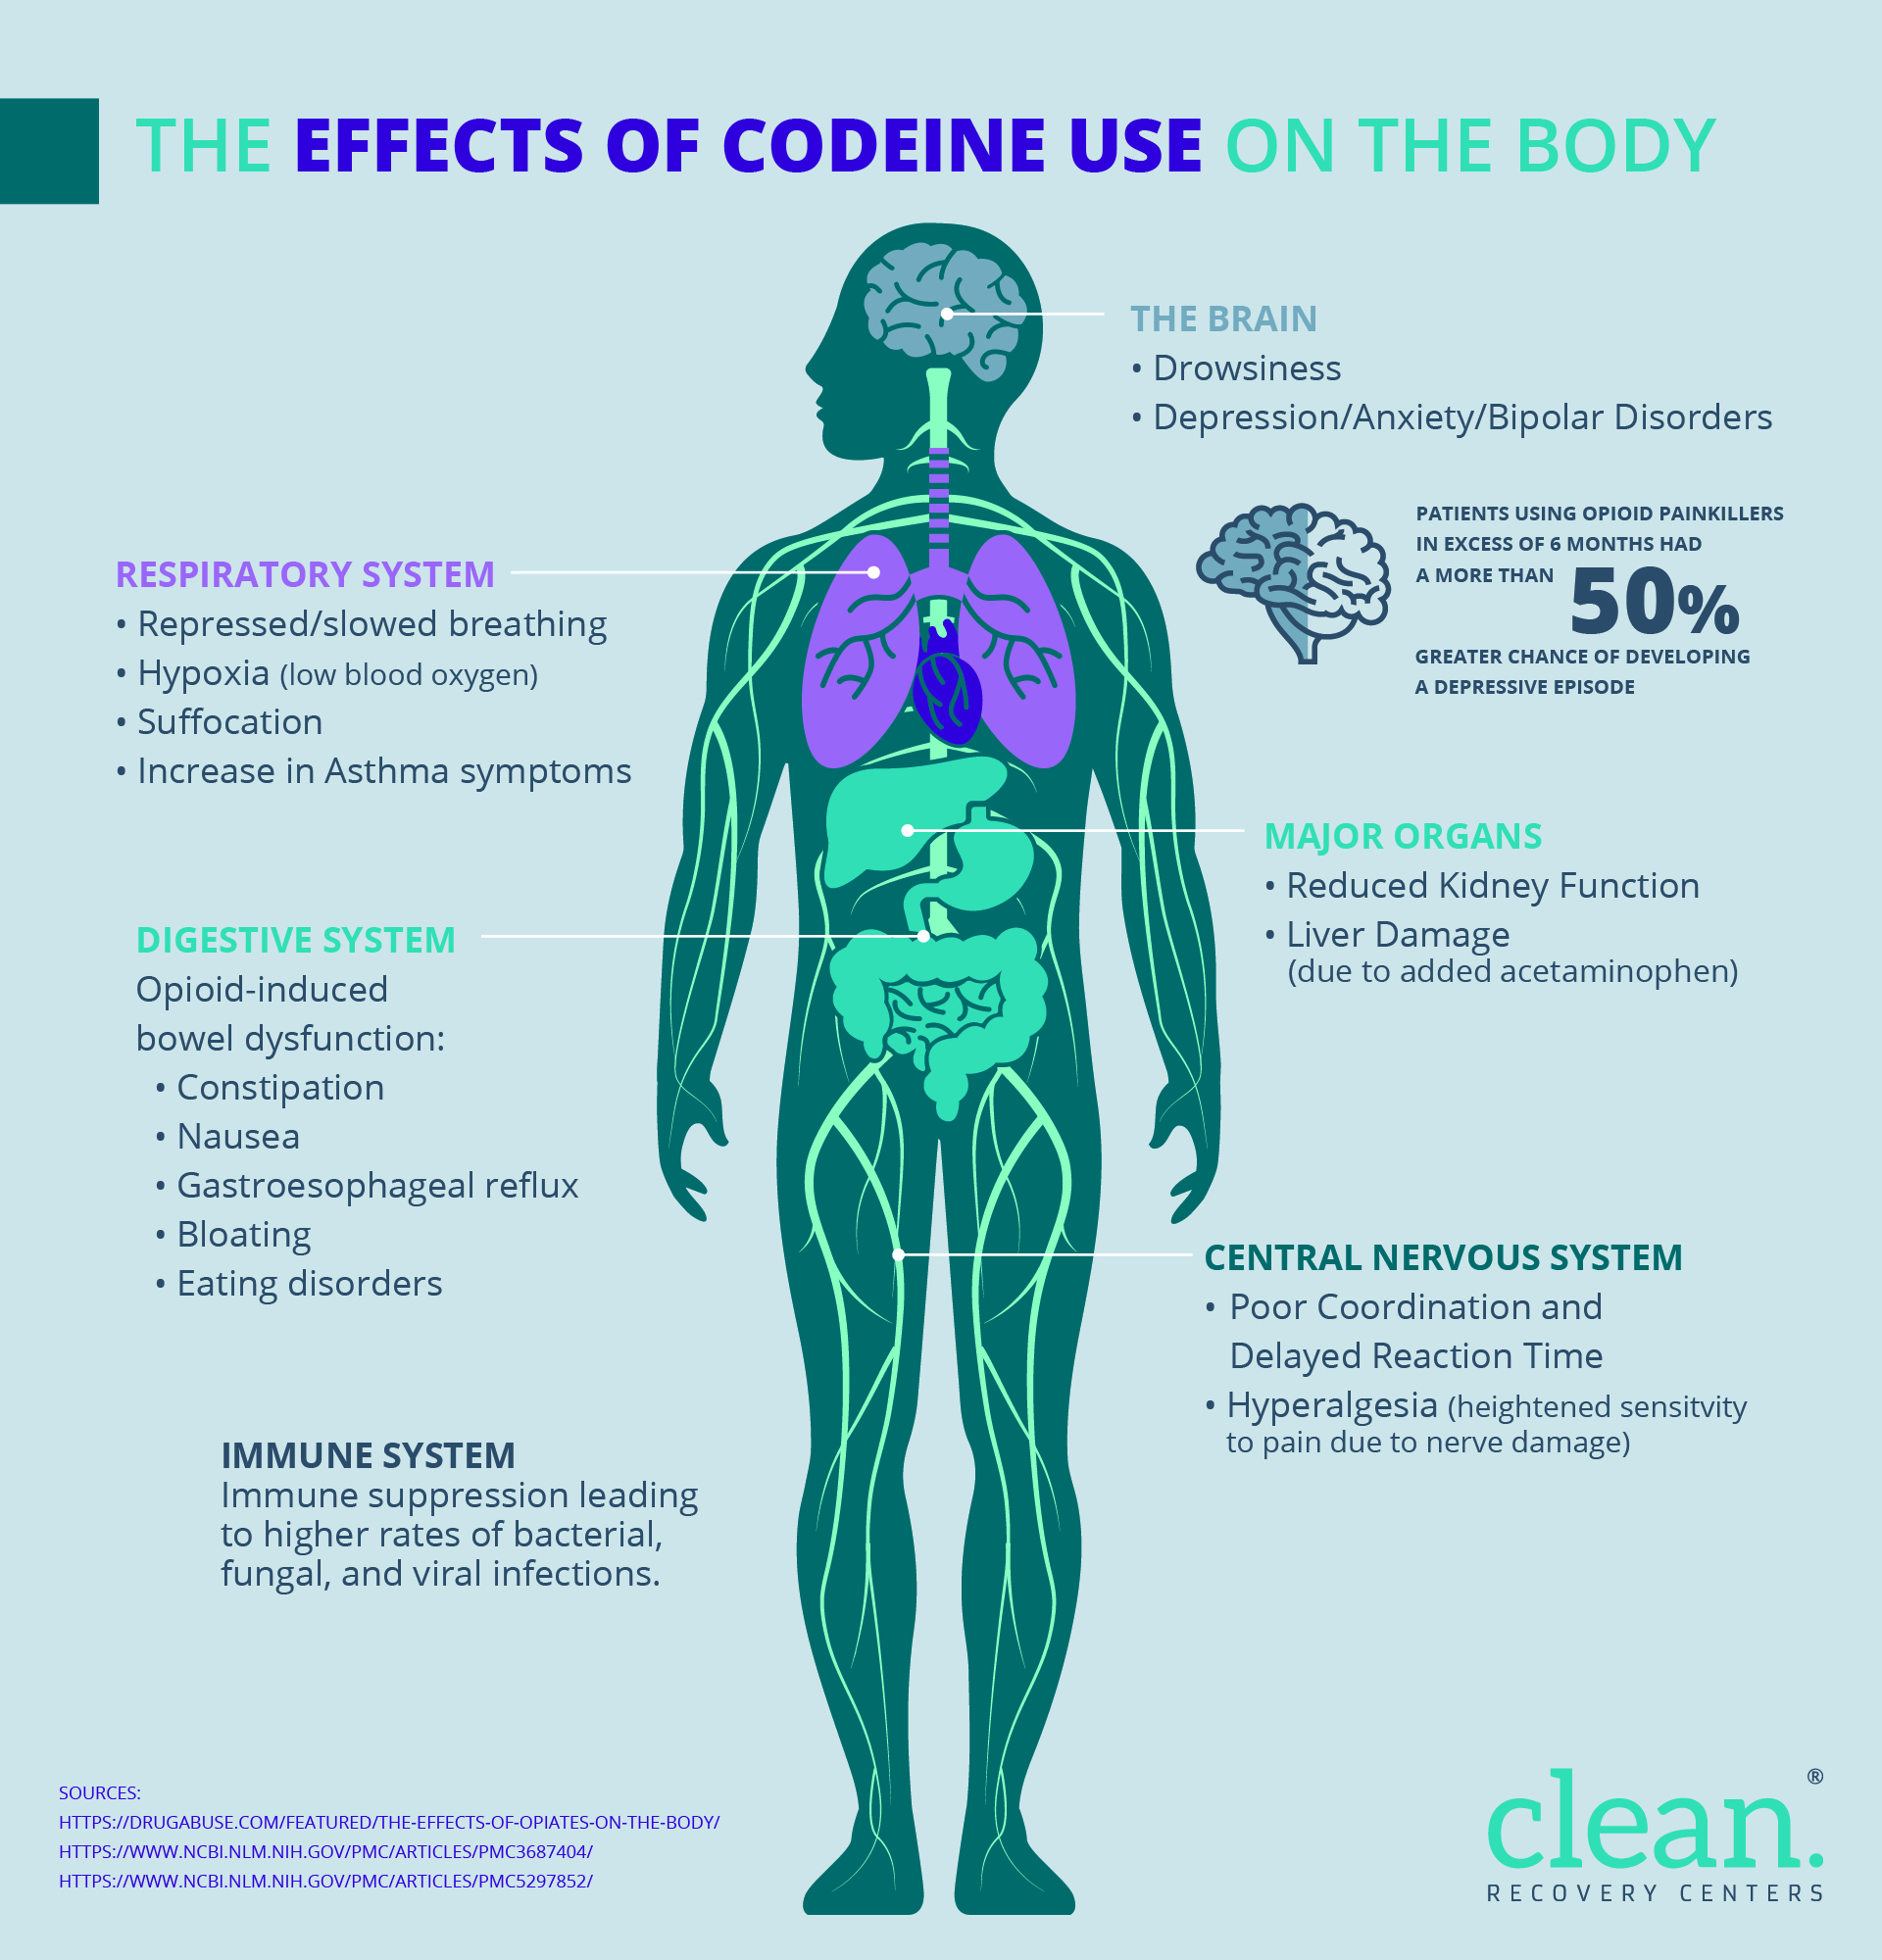 ic-Effects-of-Codeine-on-the-Body